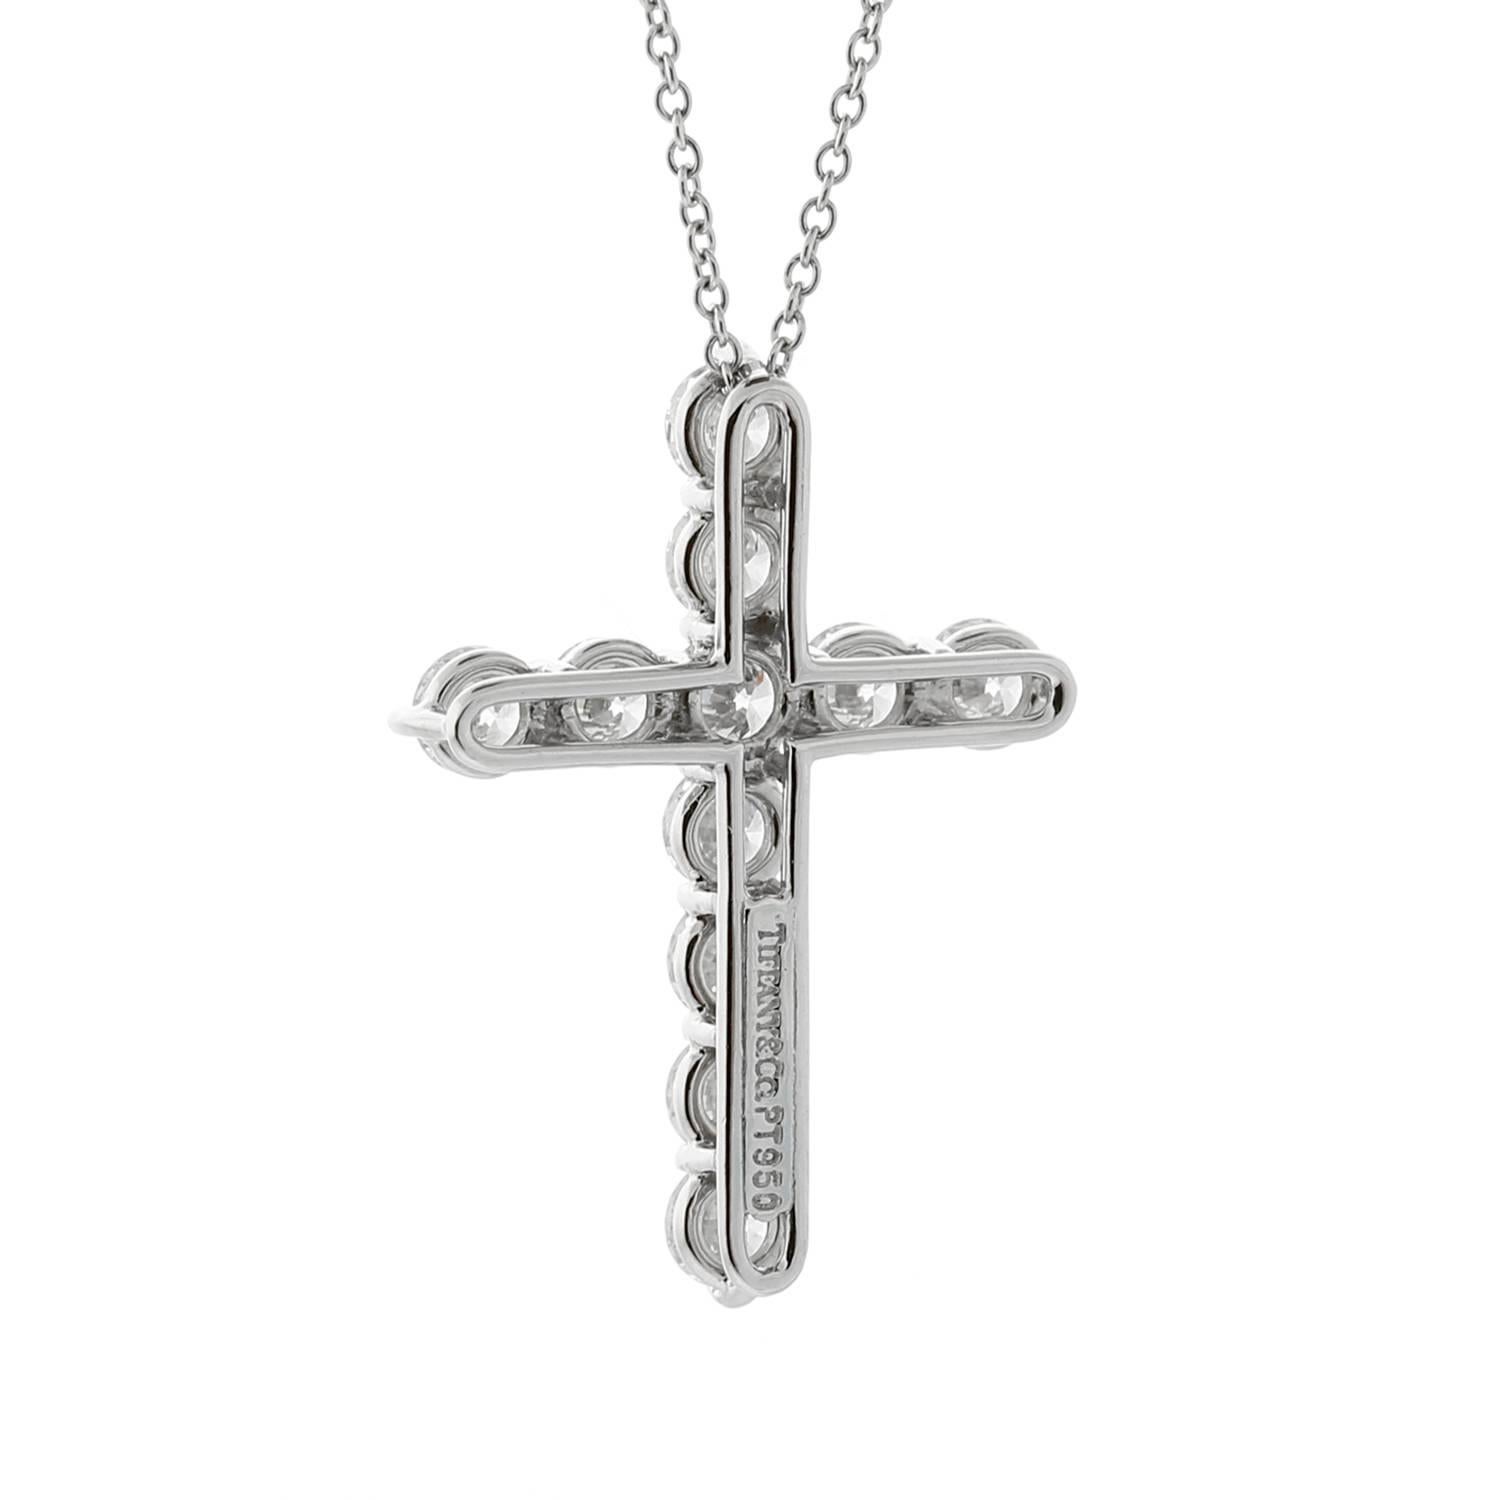 A fabulous Tiffany & Co diamond cross necklace set with 1.71ct of the finest Tiffany & Co round brilliant cut diamonds in platinum.